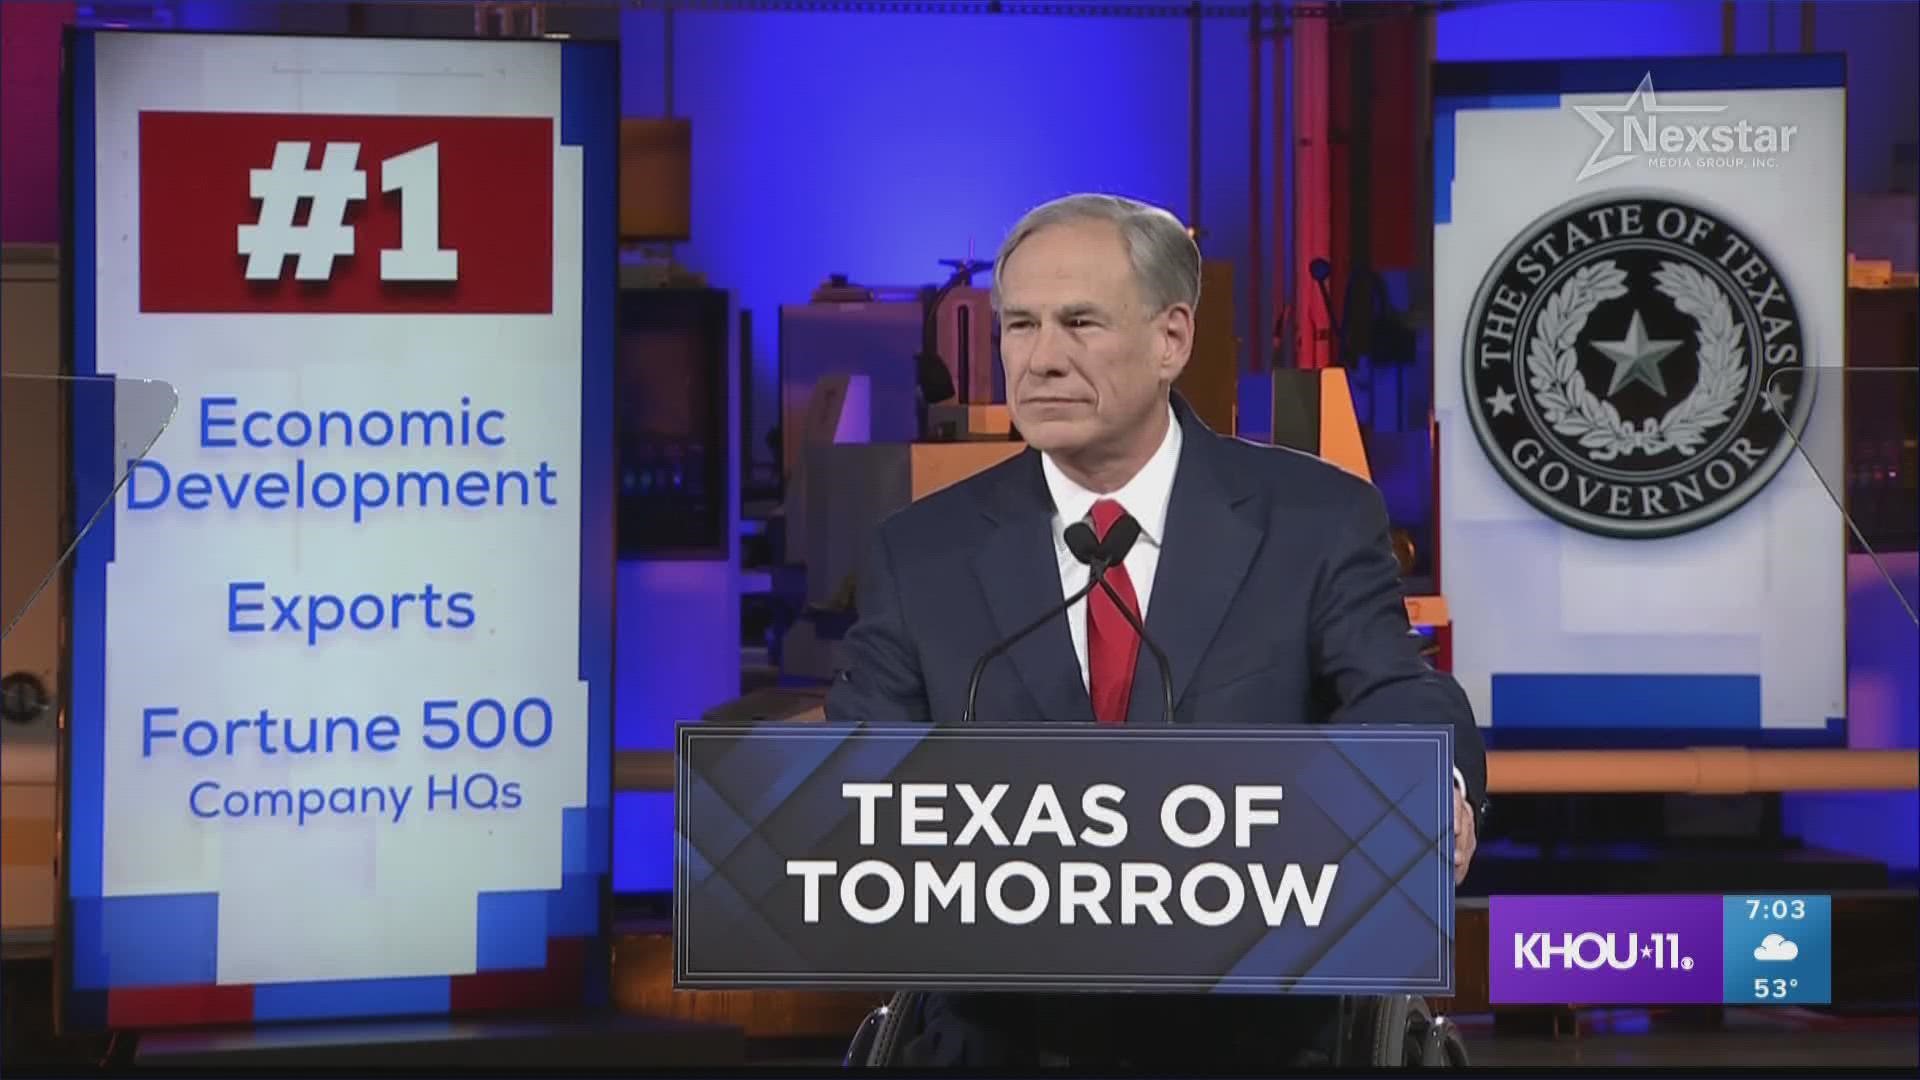 Gov. Abbott claimed Texas has added 1.9 million new jobs since he became governor.